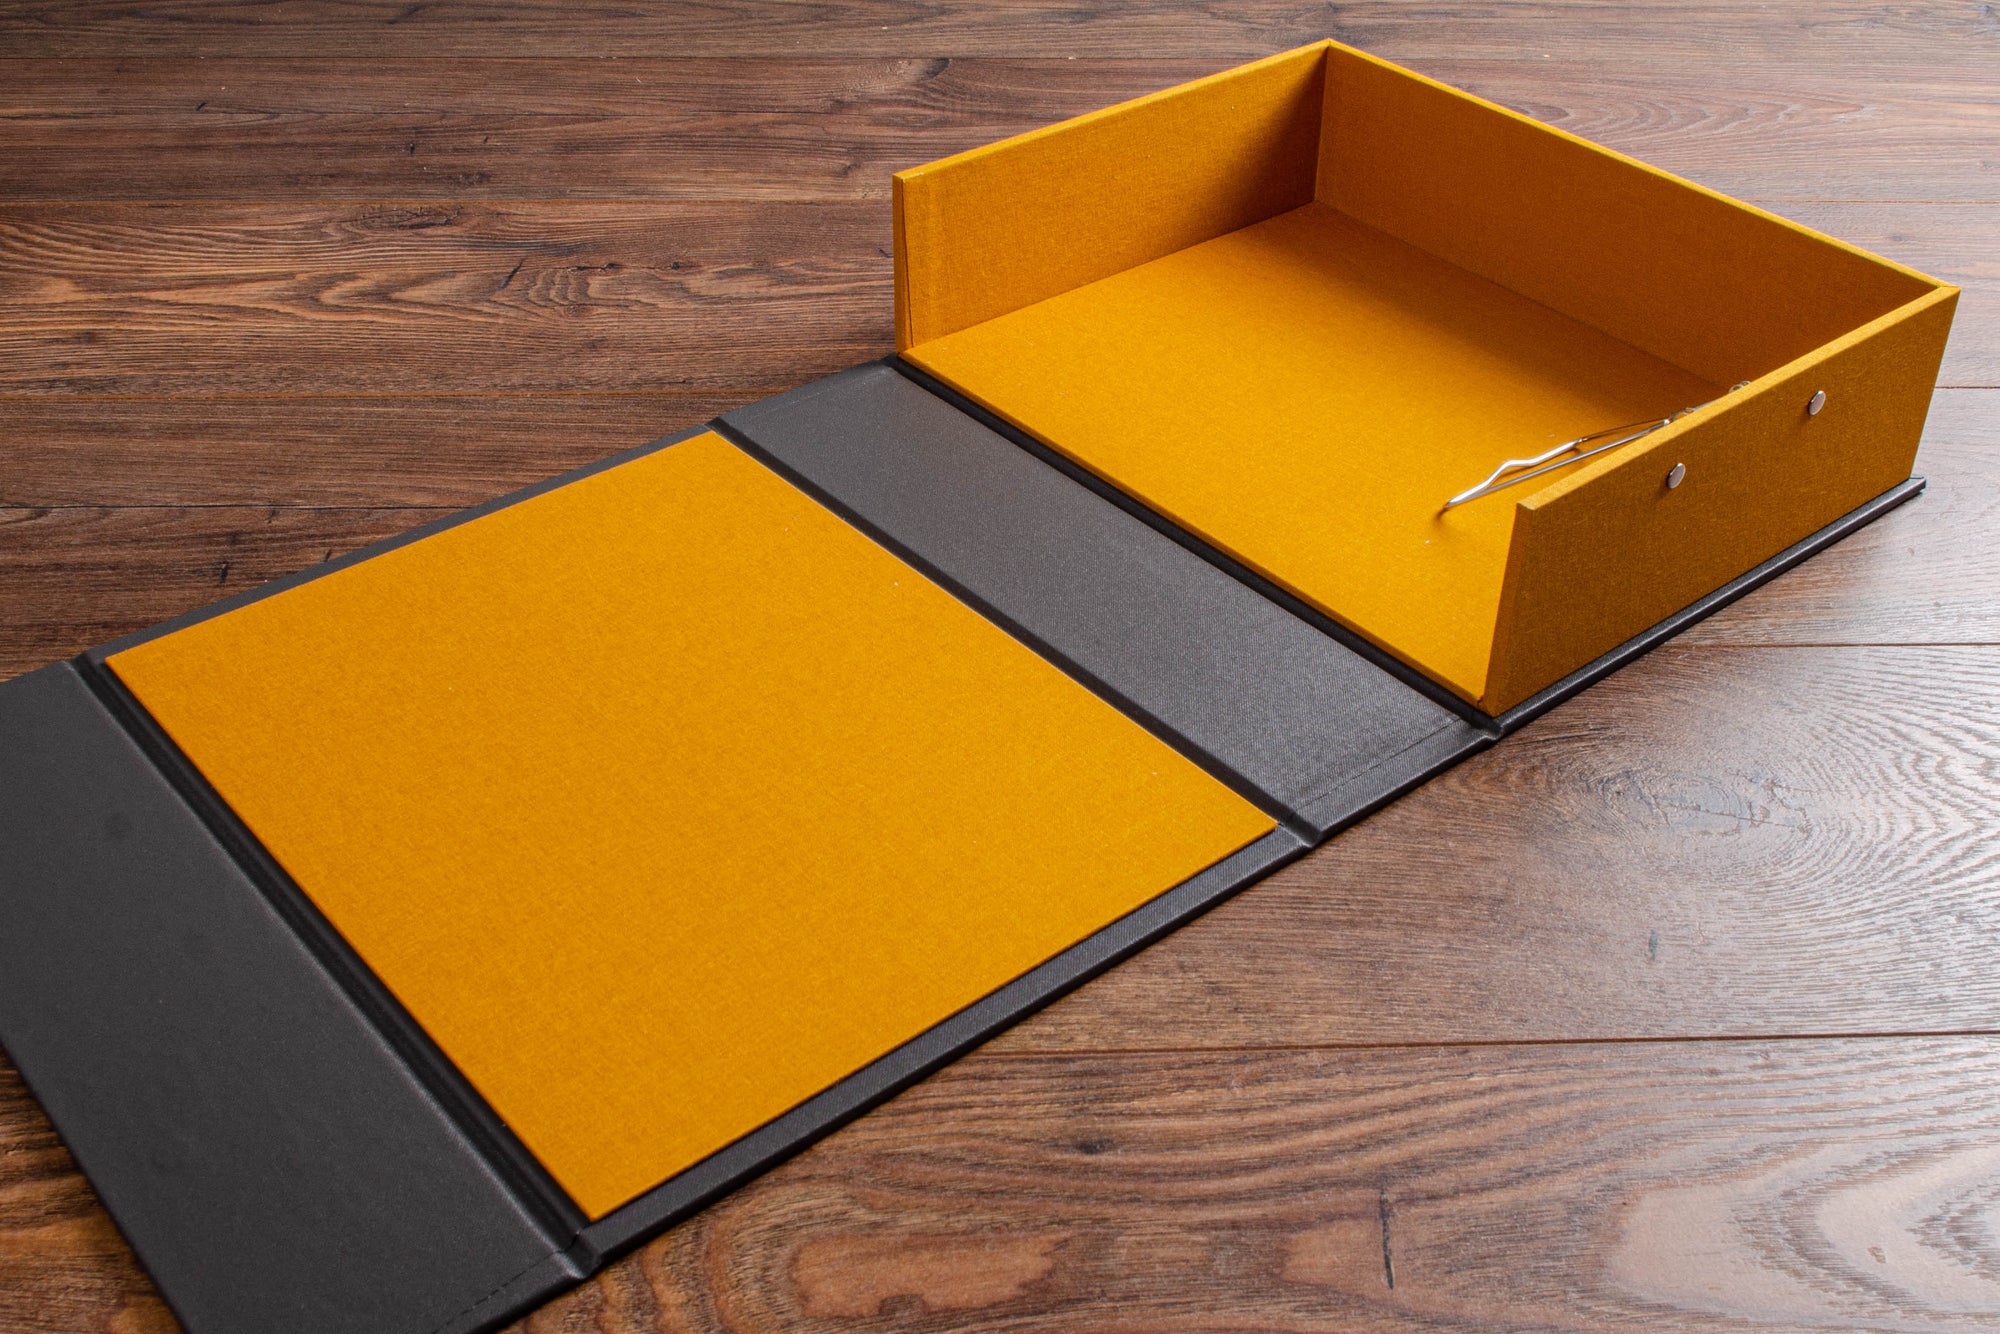 Clamshell vehicle document box with yellow interior 